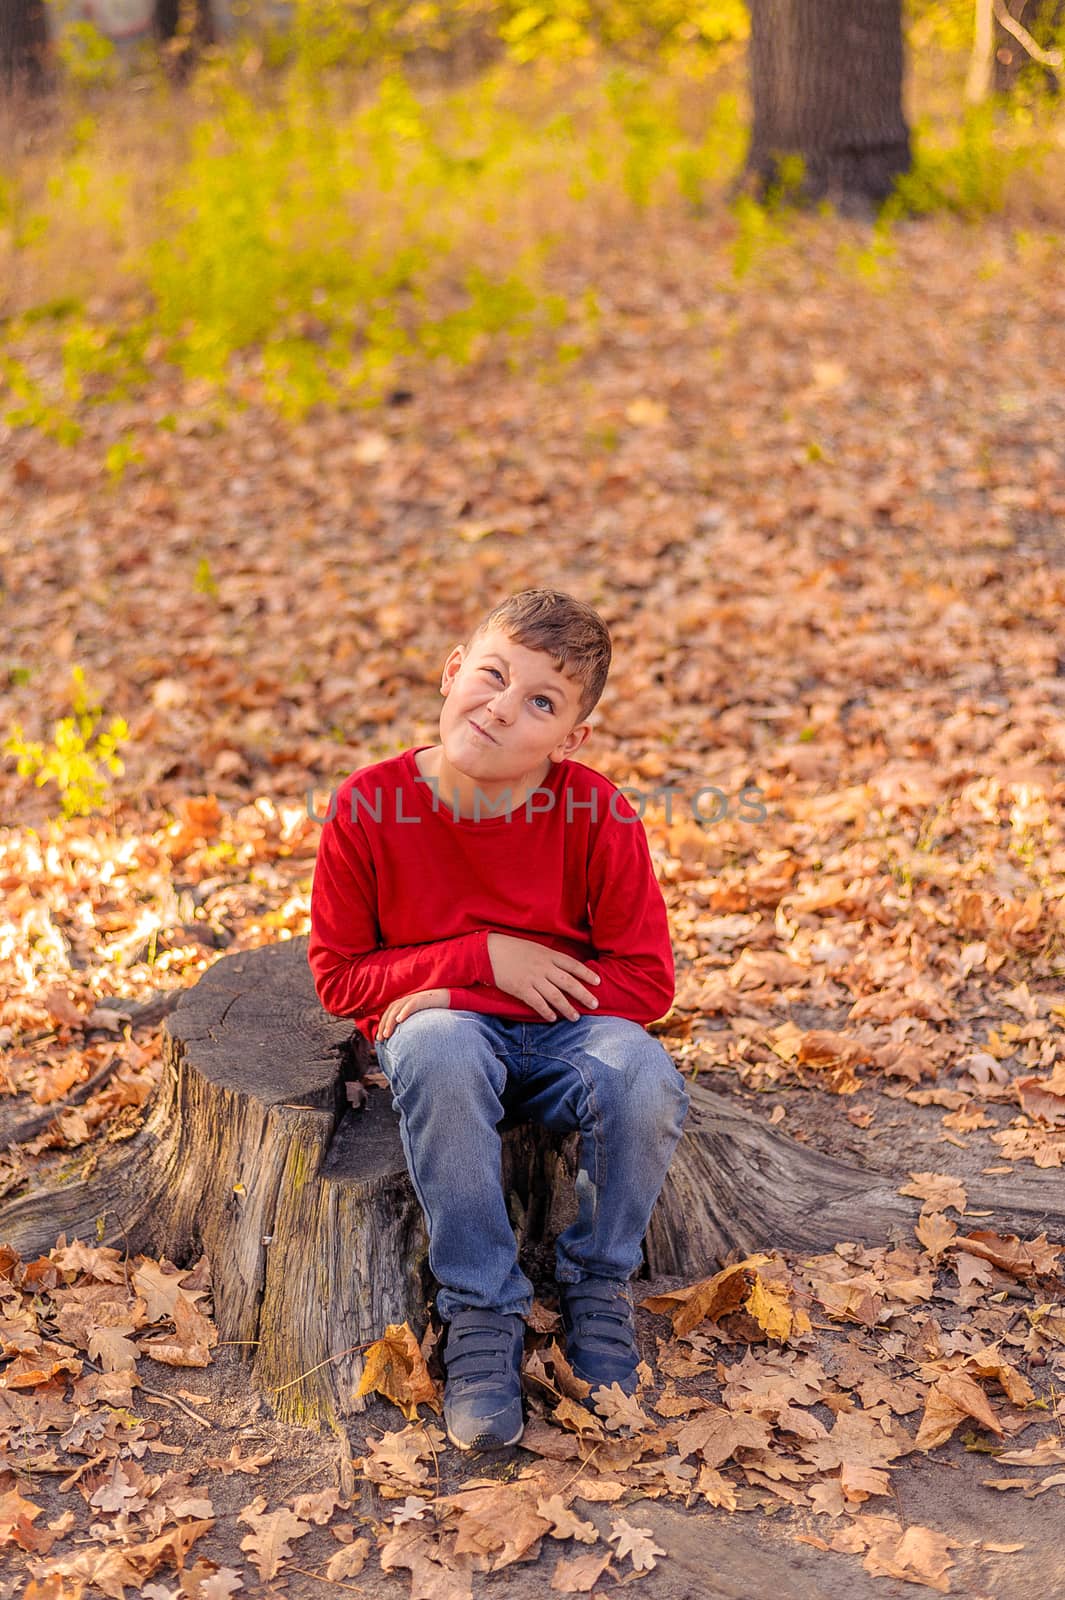 funny boy in a red sweater sitting on a stump in the autumn forest by chernobrovin